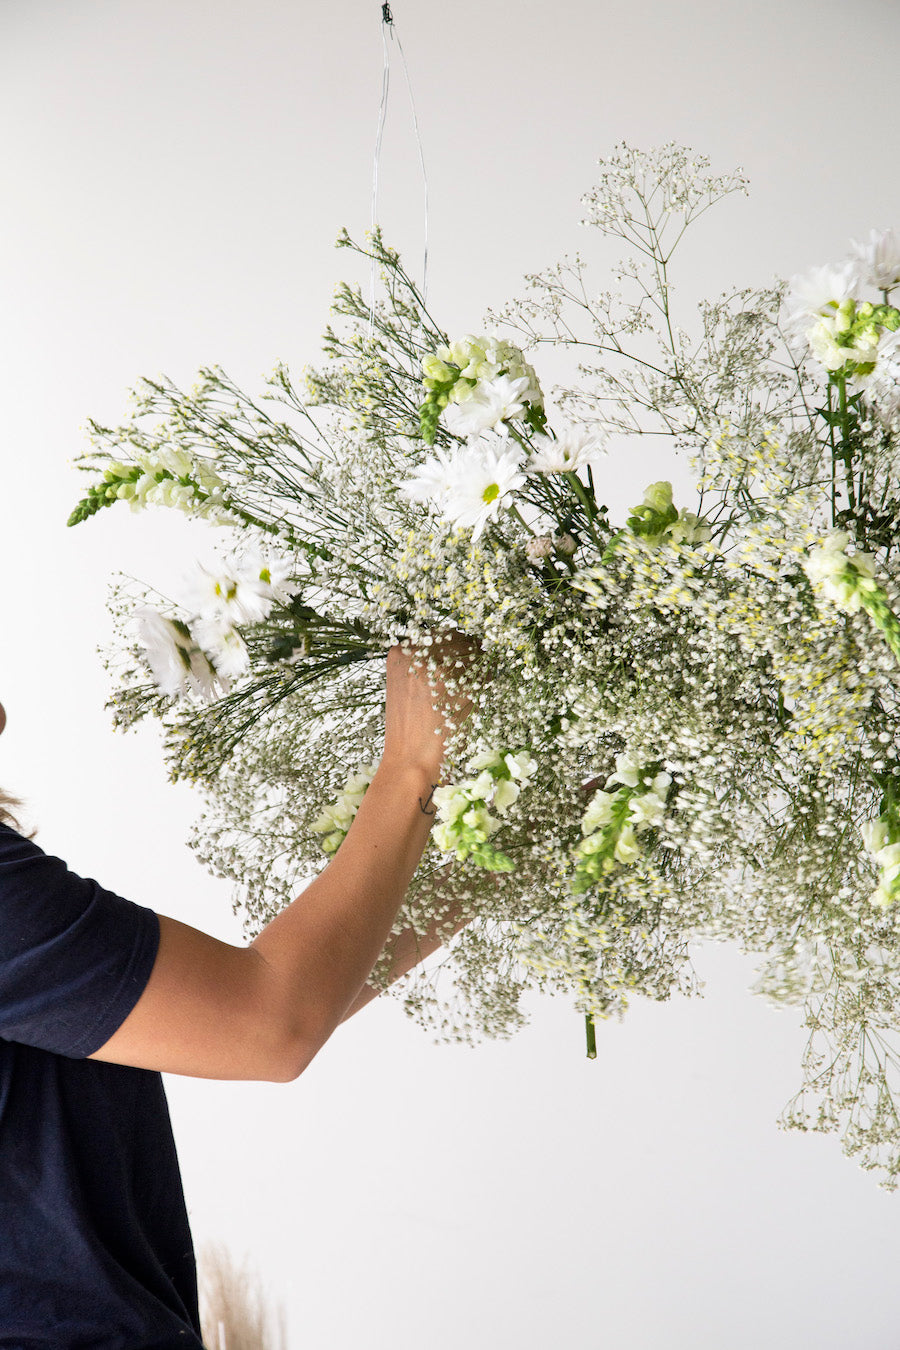 Hanging floral installation with white daisies.